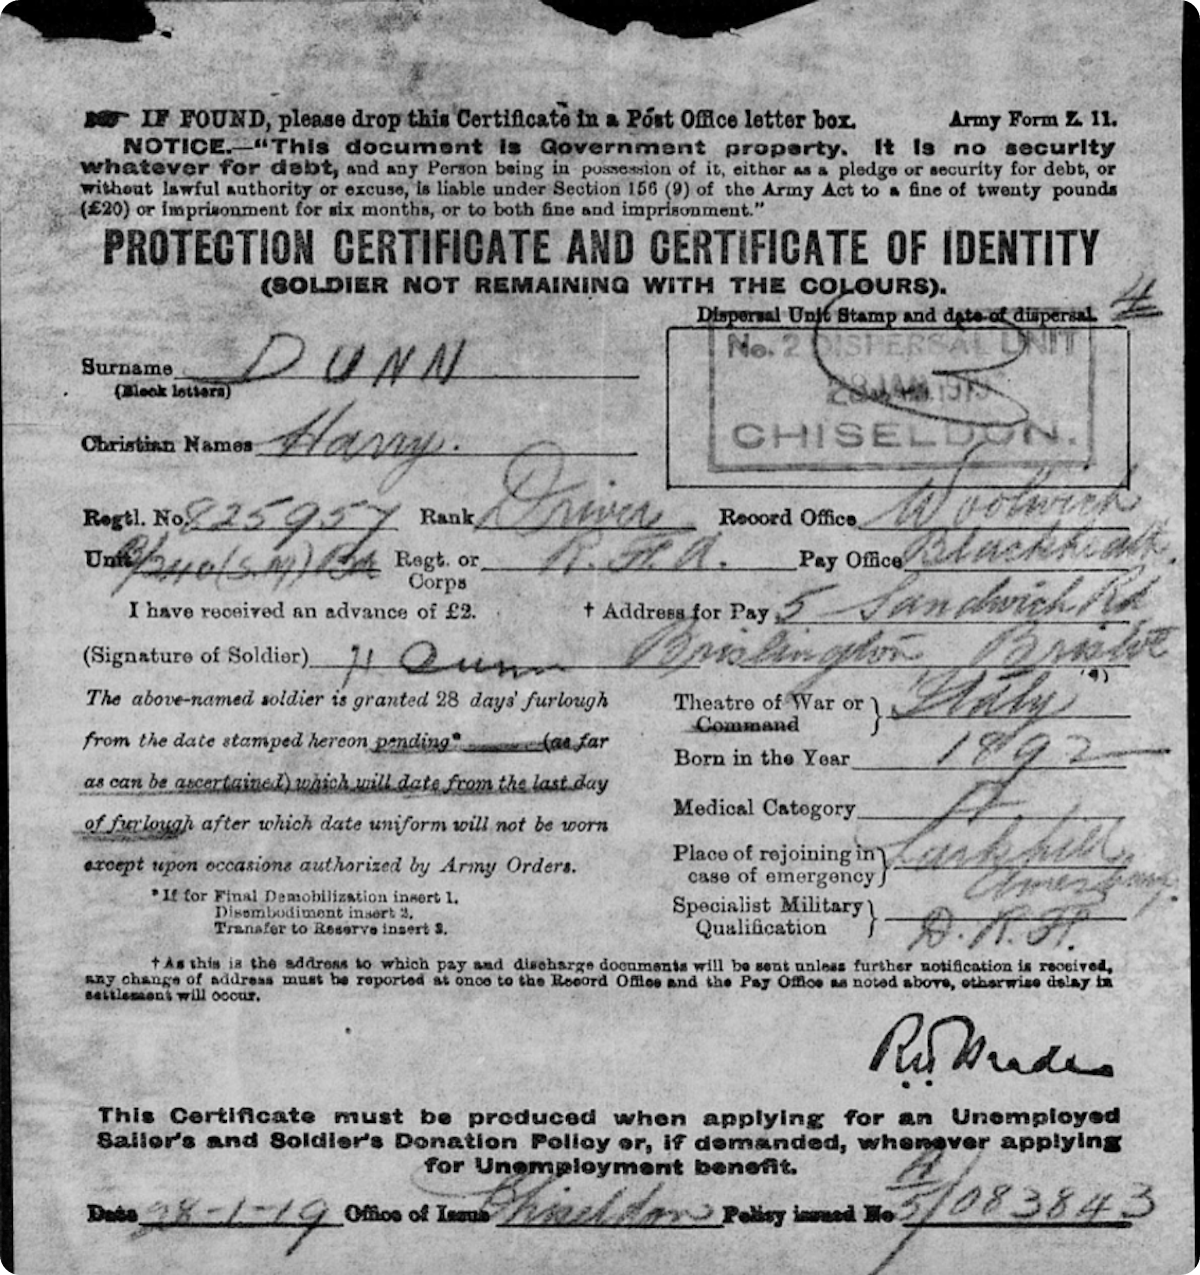 Harry’s identity certificate in his service records.